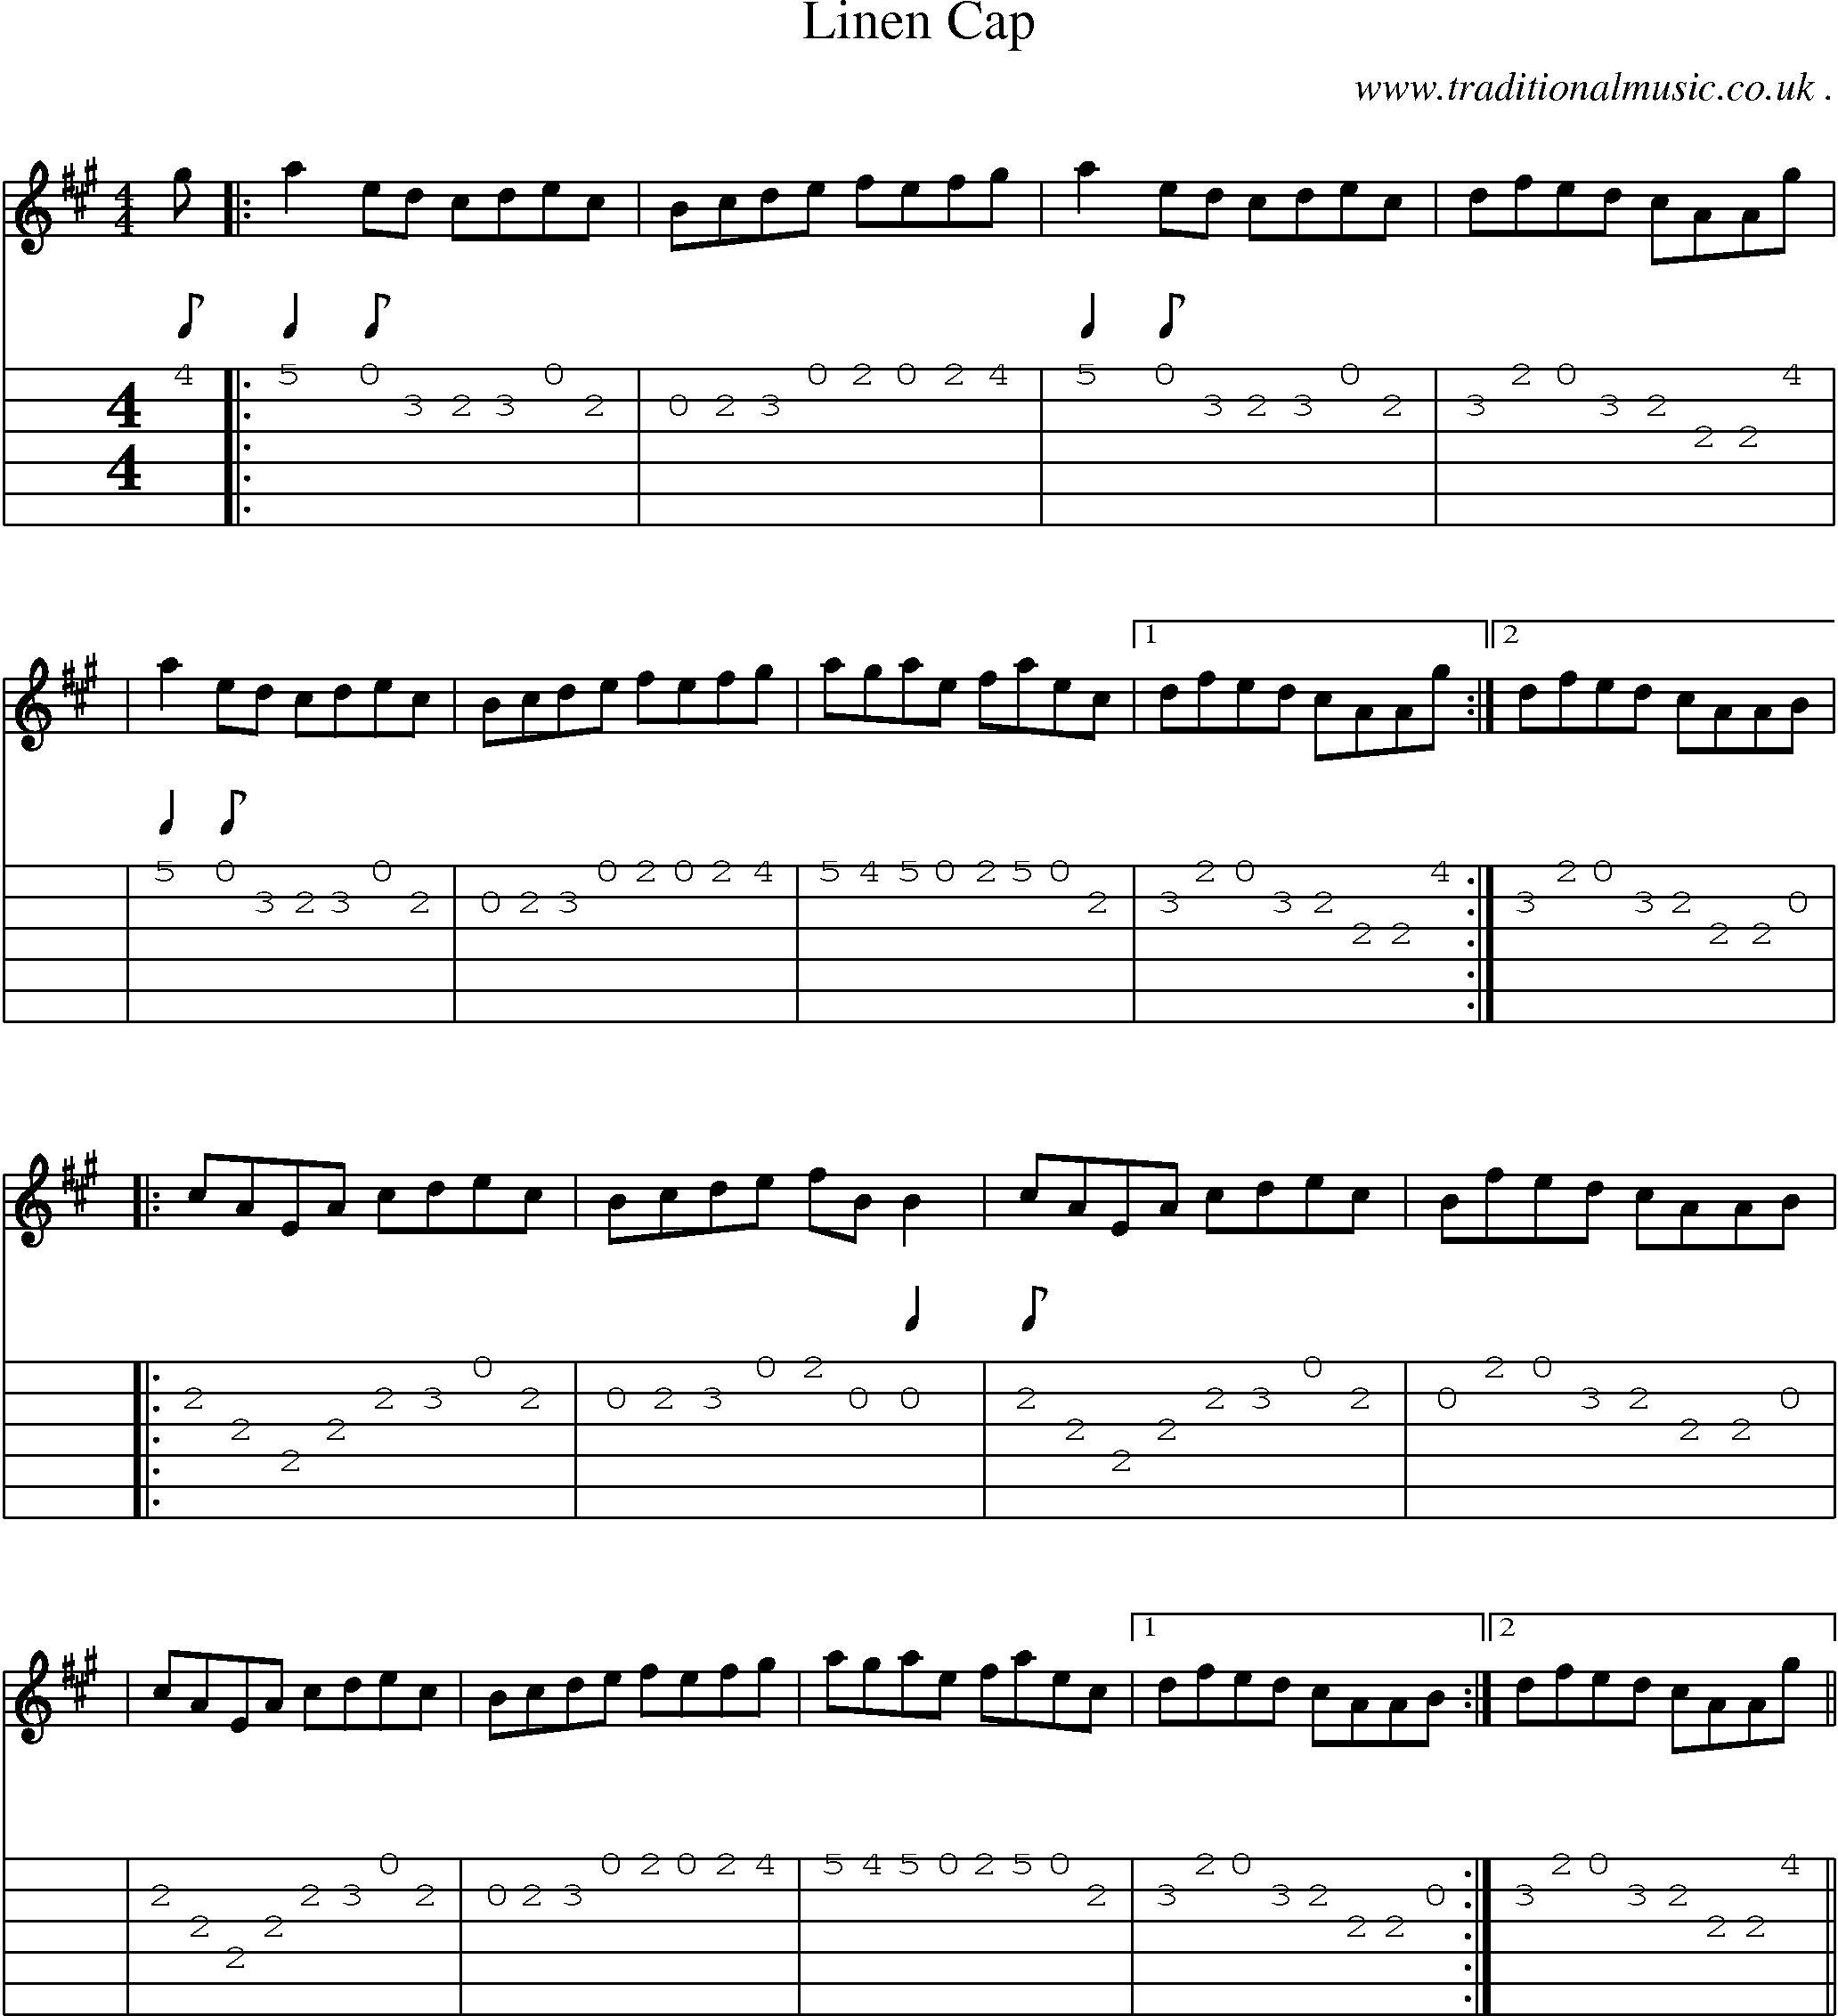 Sheet-Music and Guitar Tabs for Linen Cap